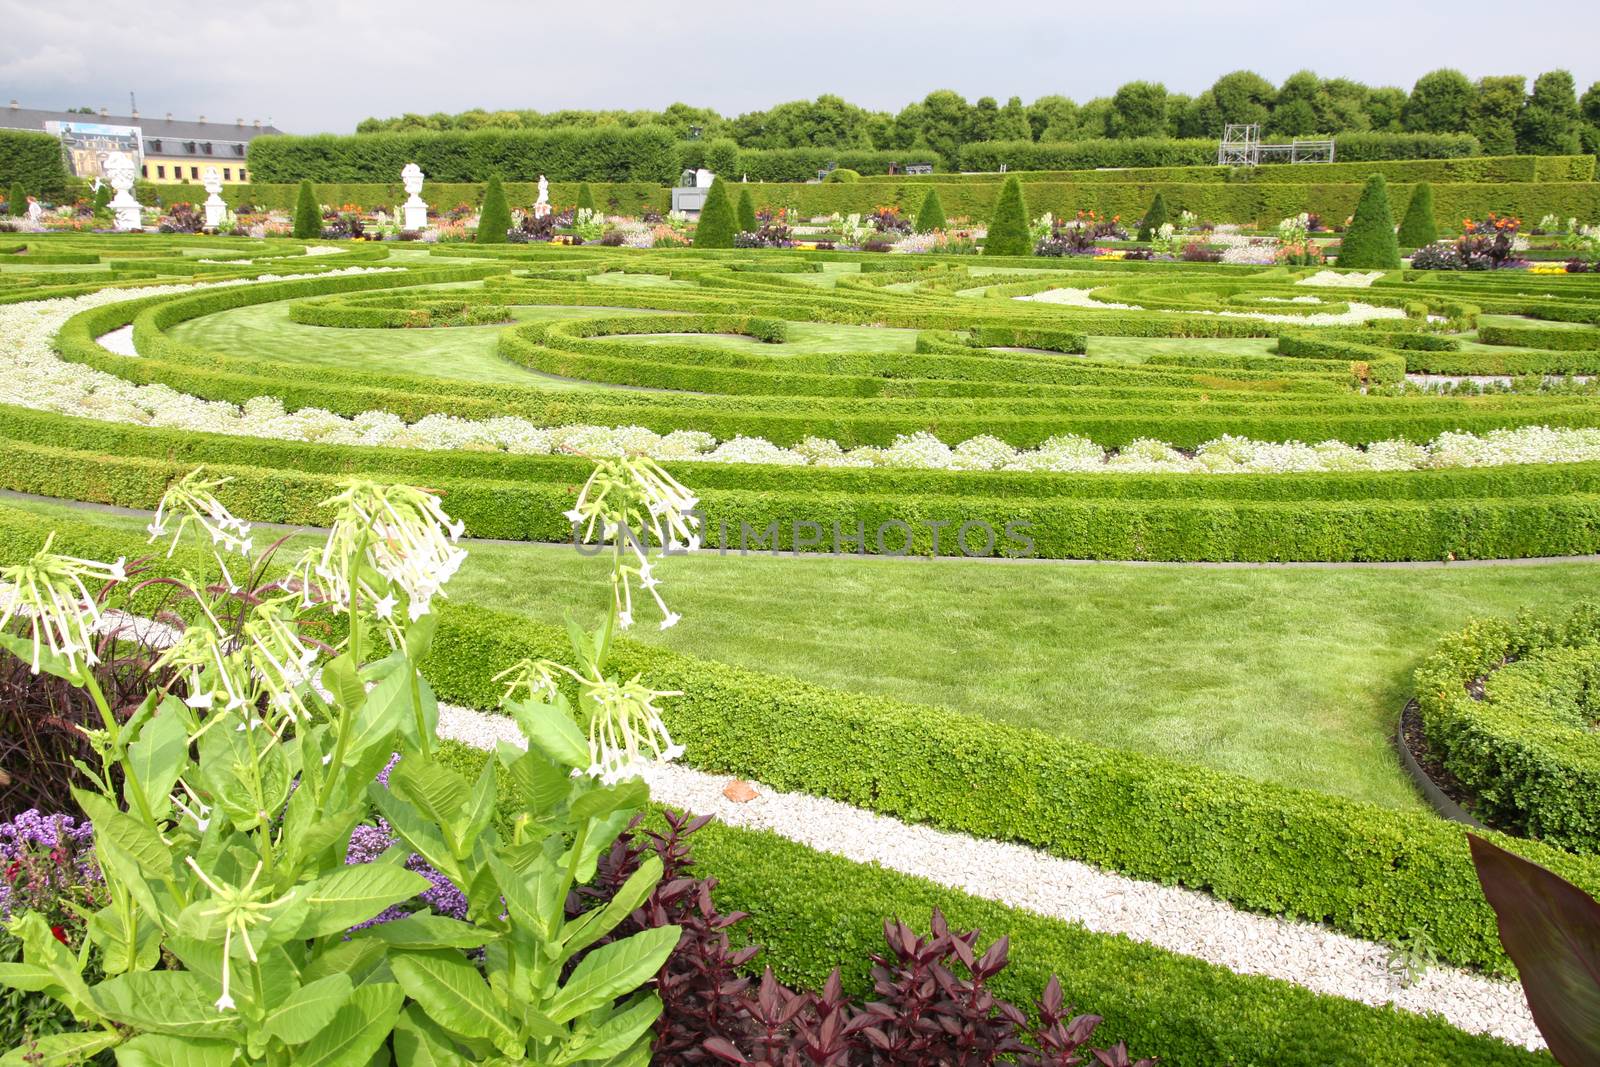 HANNOVER, GERMANY - 30 JULY: It's ranks the most important gardens in Europe. The Large Gardens in Herrenhausen gardens in Hanover, German on July 30,2014.